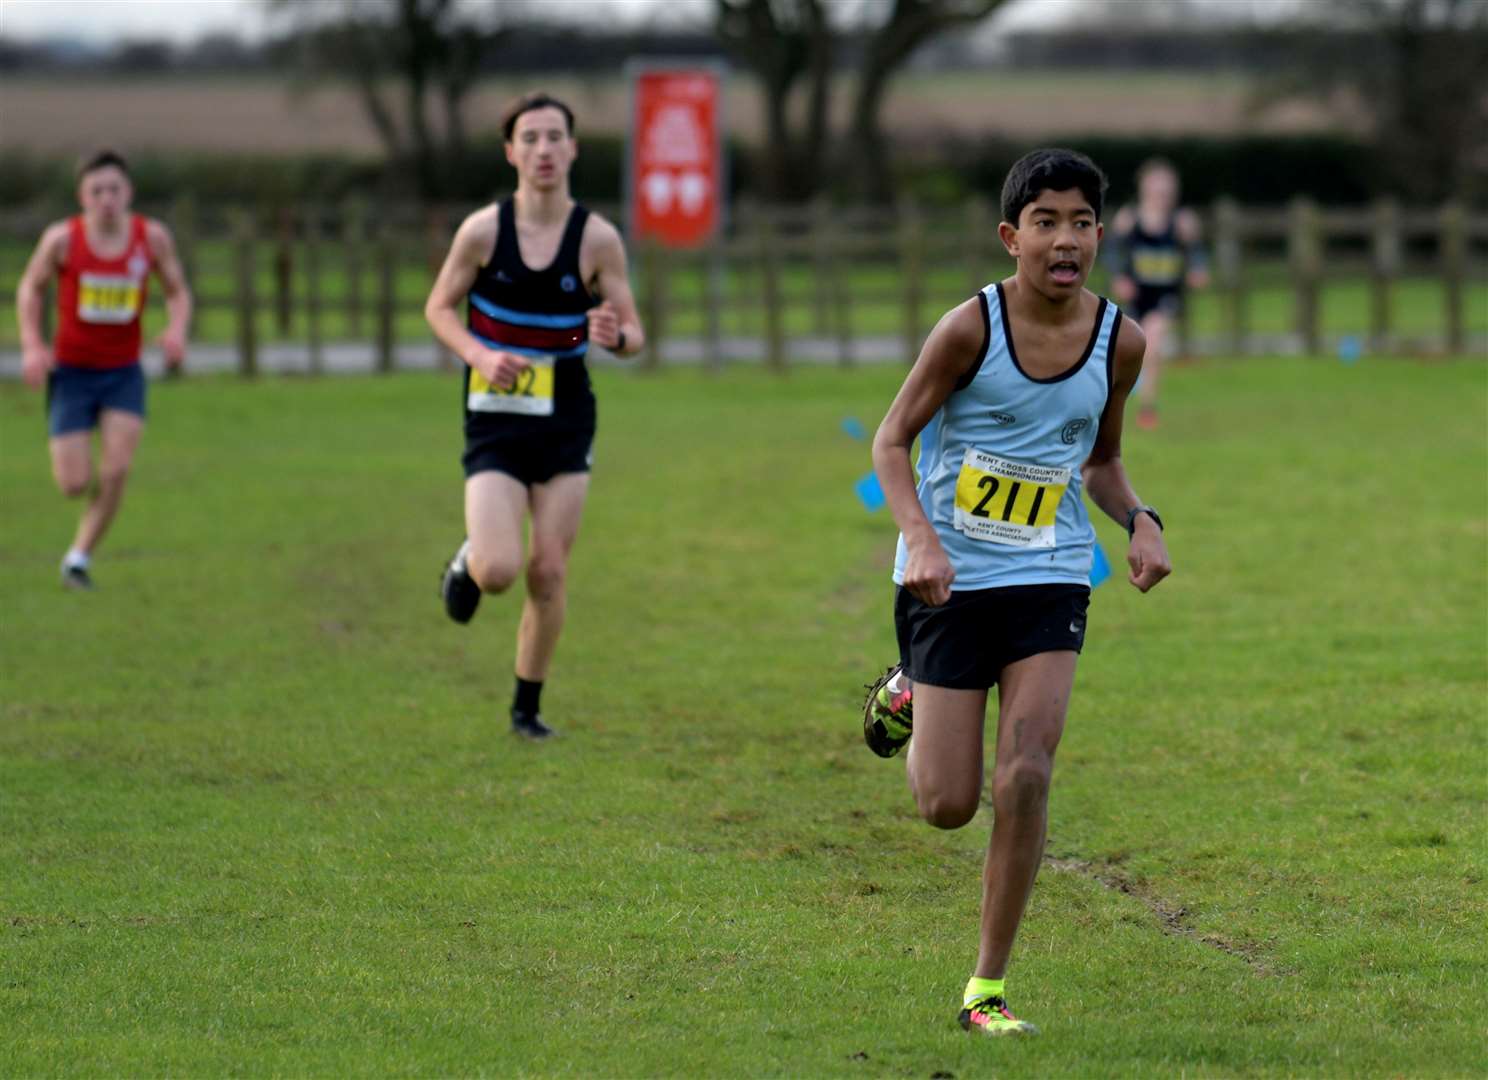 Aniket Iyengar (No.211) of Cambridge Harriers came home 14th at Brands Hatch in the under-15 boys’ event. Picture: Barry Goodwin